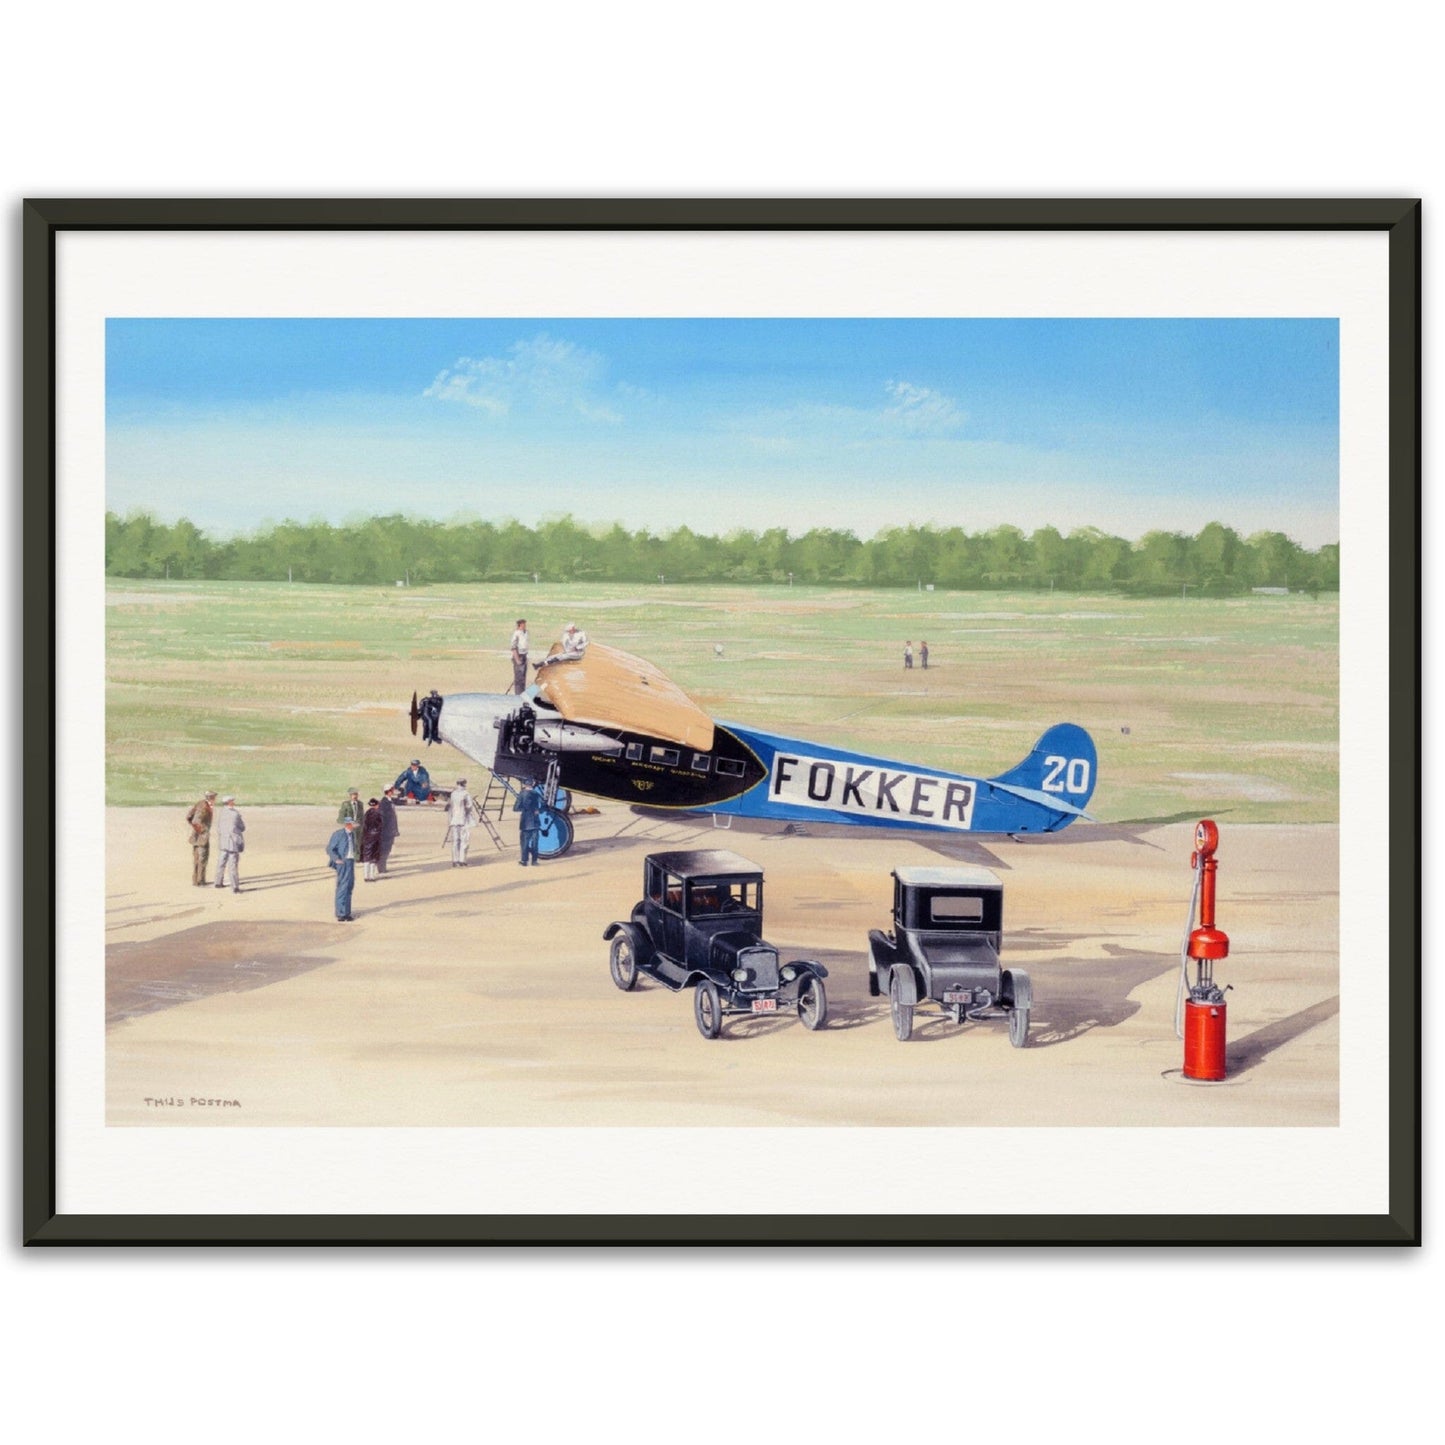 Thijs Postma - Poster - Fokker F.7/3m During Ford Reliability Tour - Metal Frame Poster - Metal Frame TP Aviation Art 